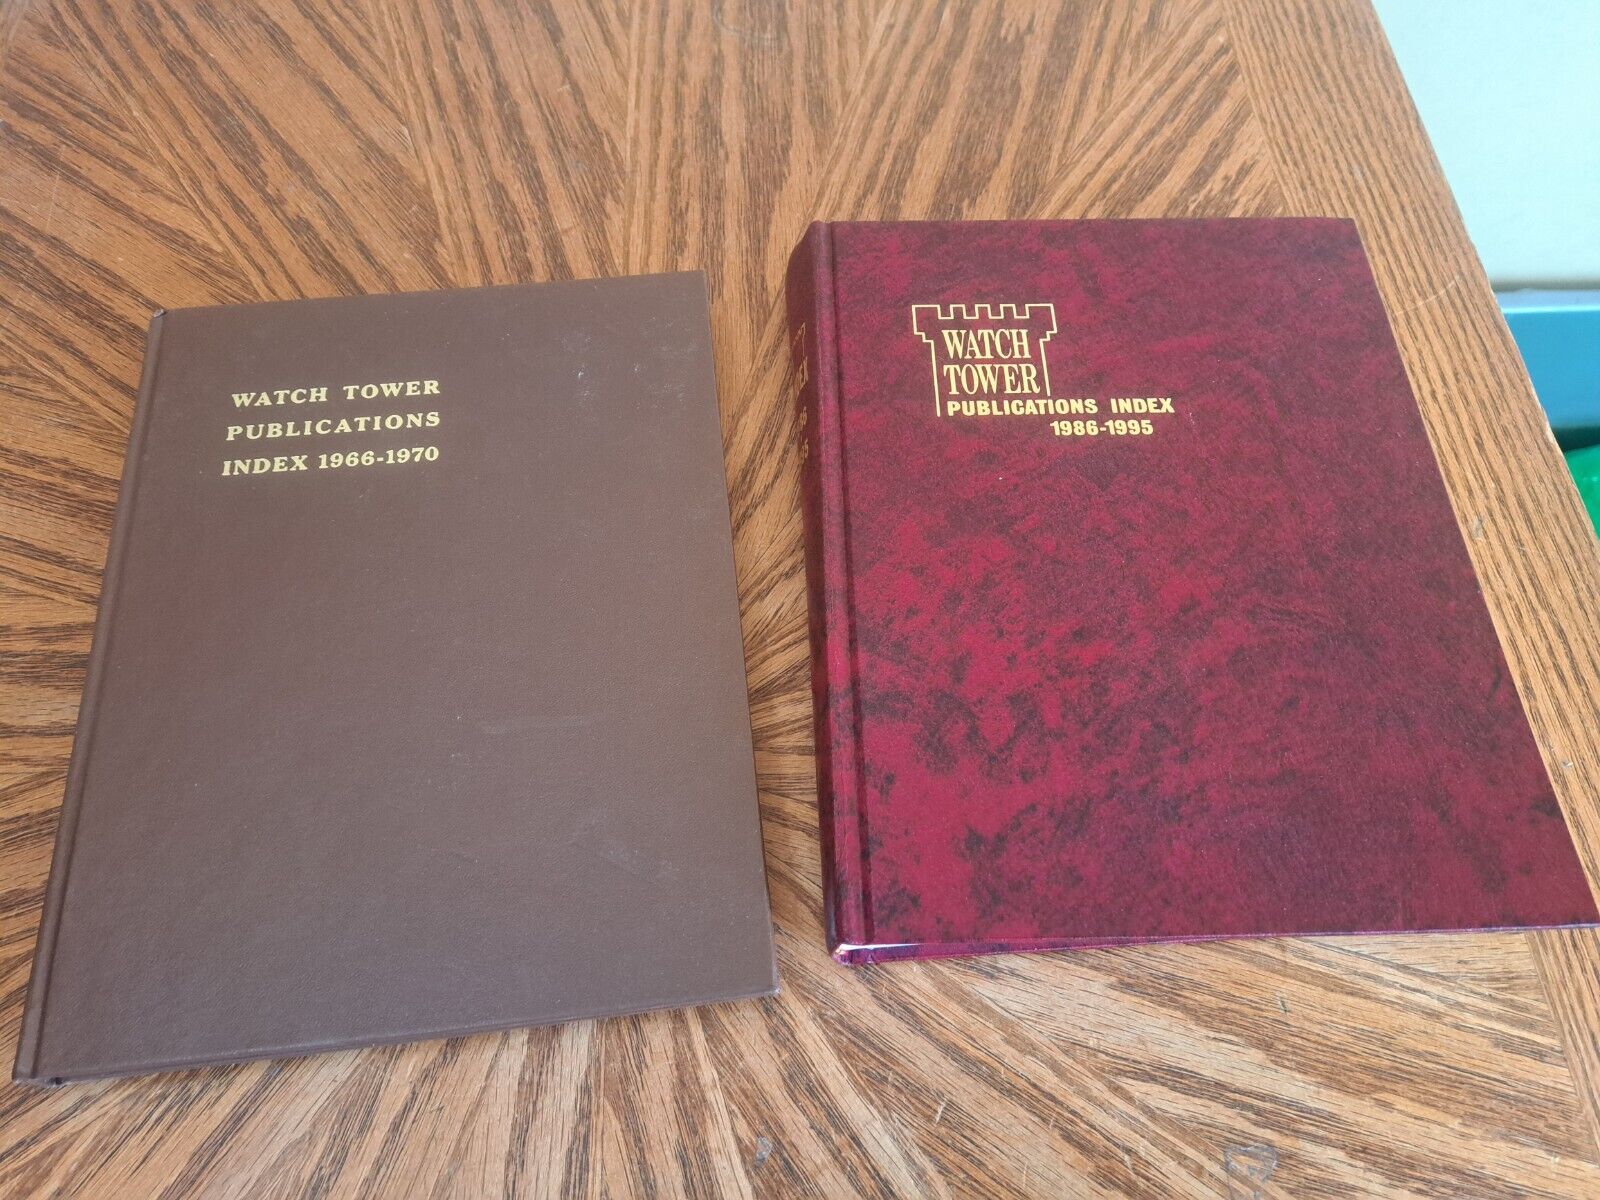 Lot of 2 - Watchtower Publications Index 1966-1970 / 1986-1995